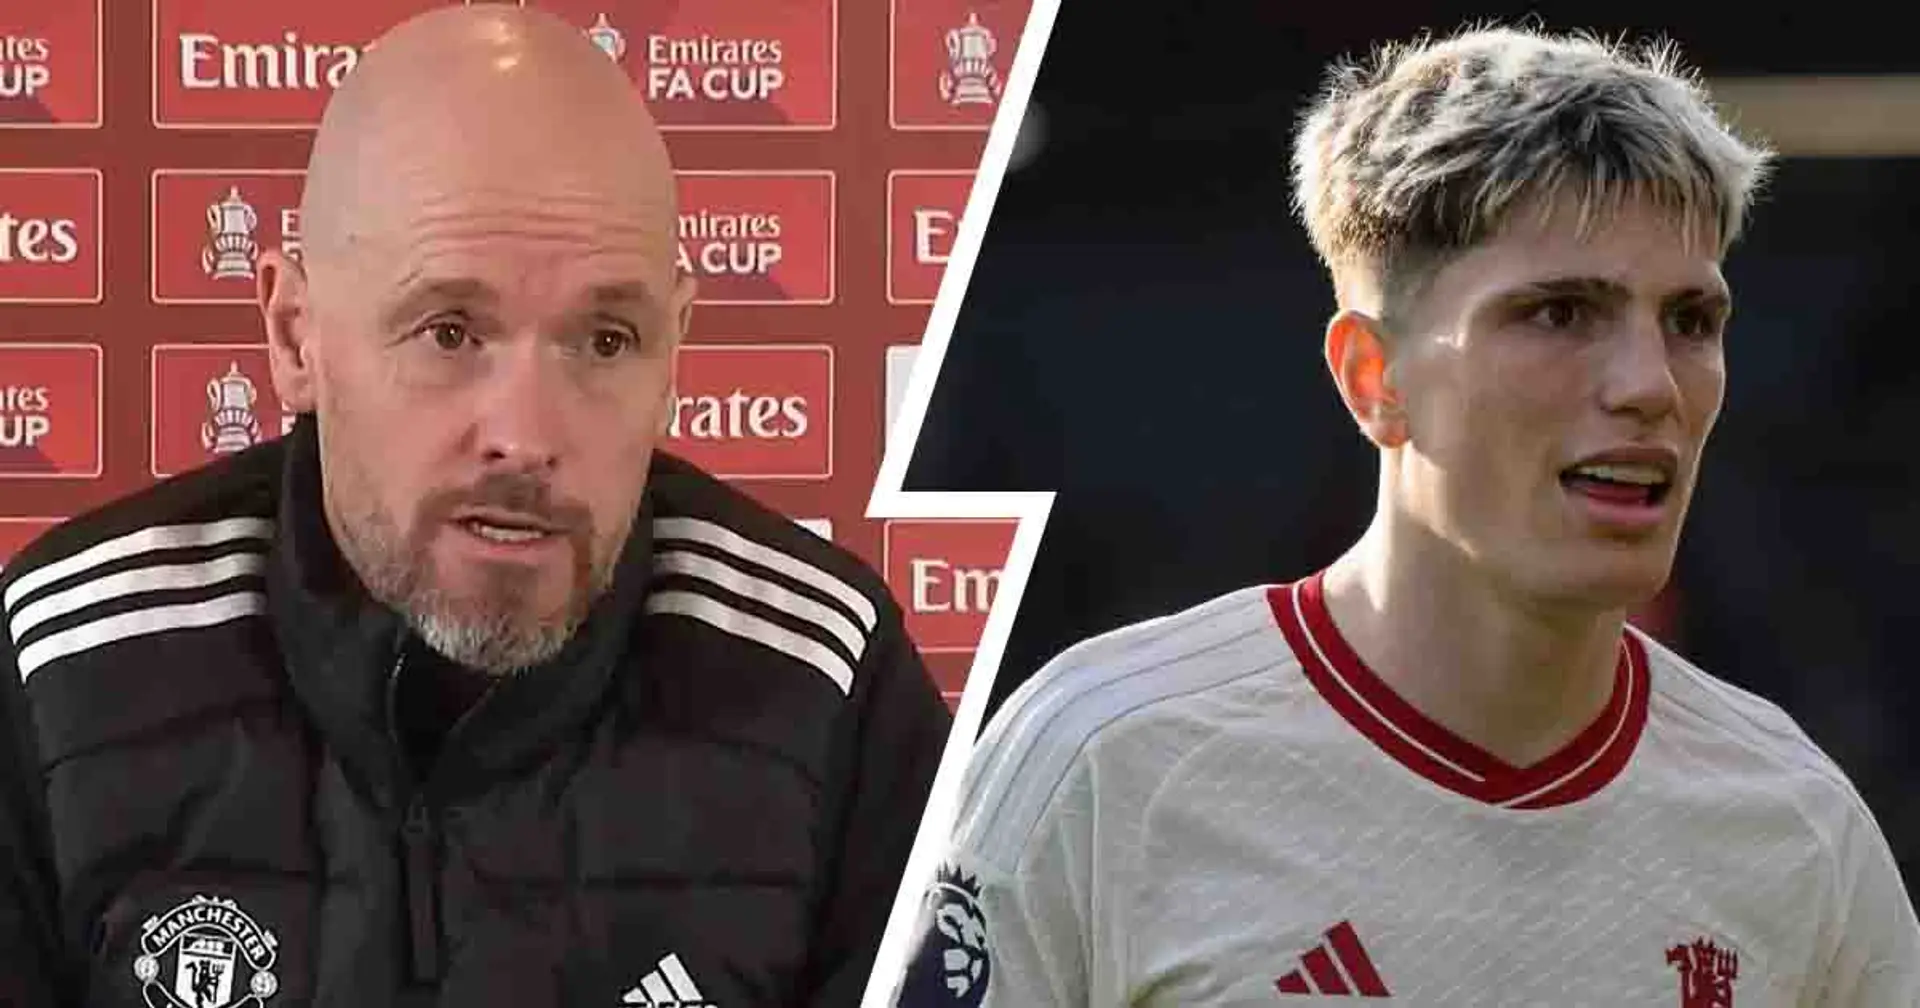 'Alejandro is a young player': Ten Hag confirms Garnacho's apology for 'liking' post criticizing him